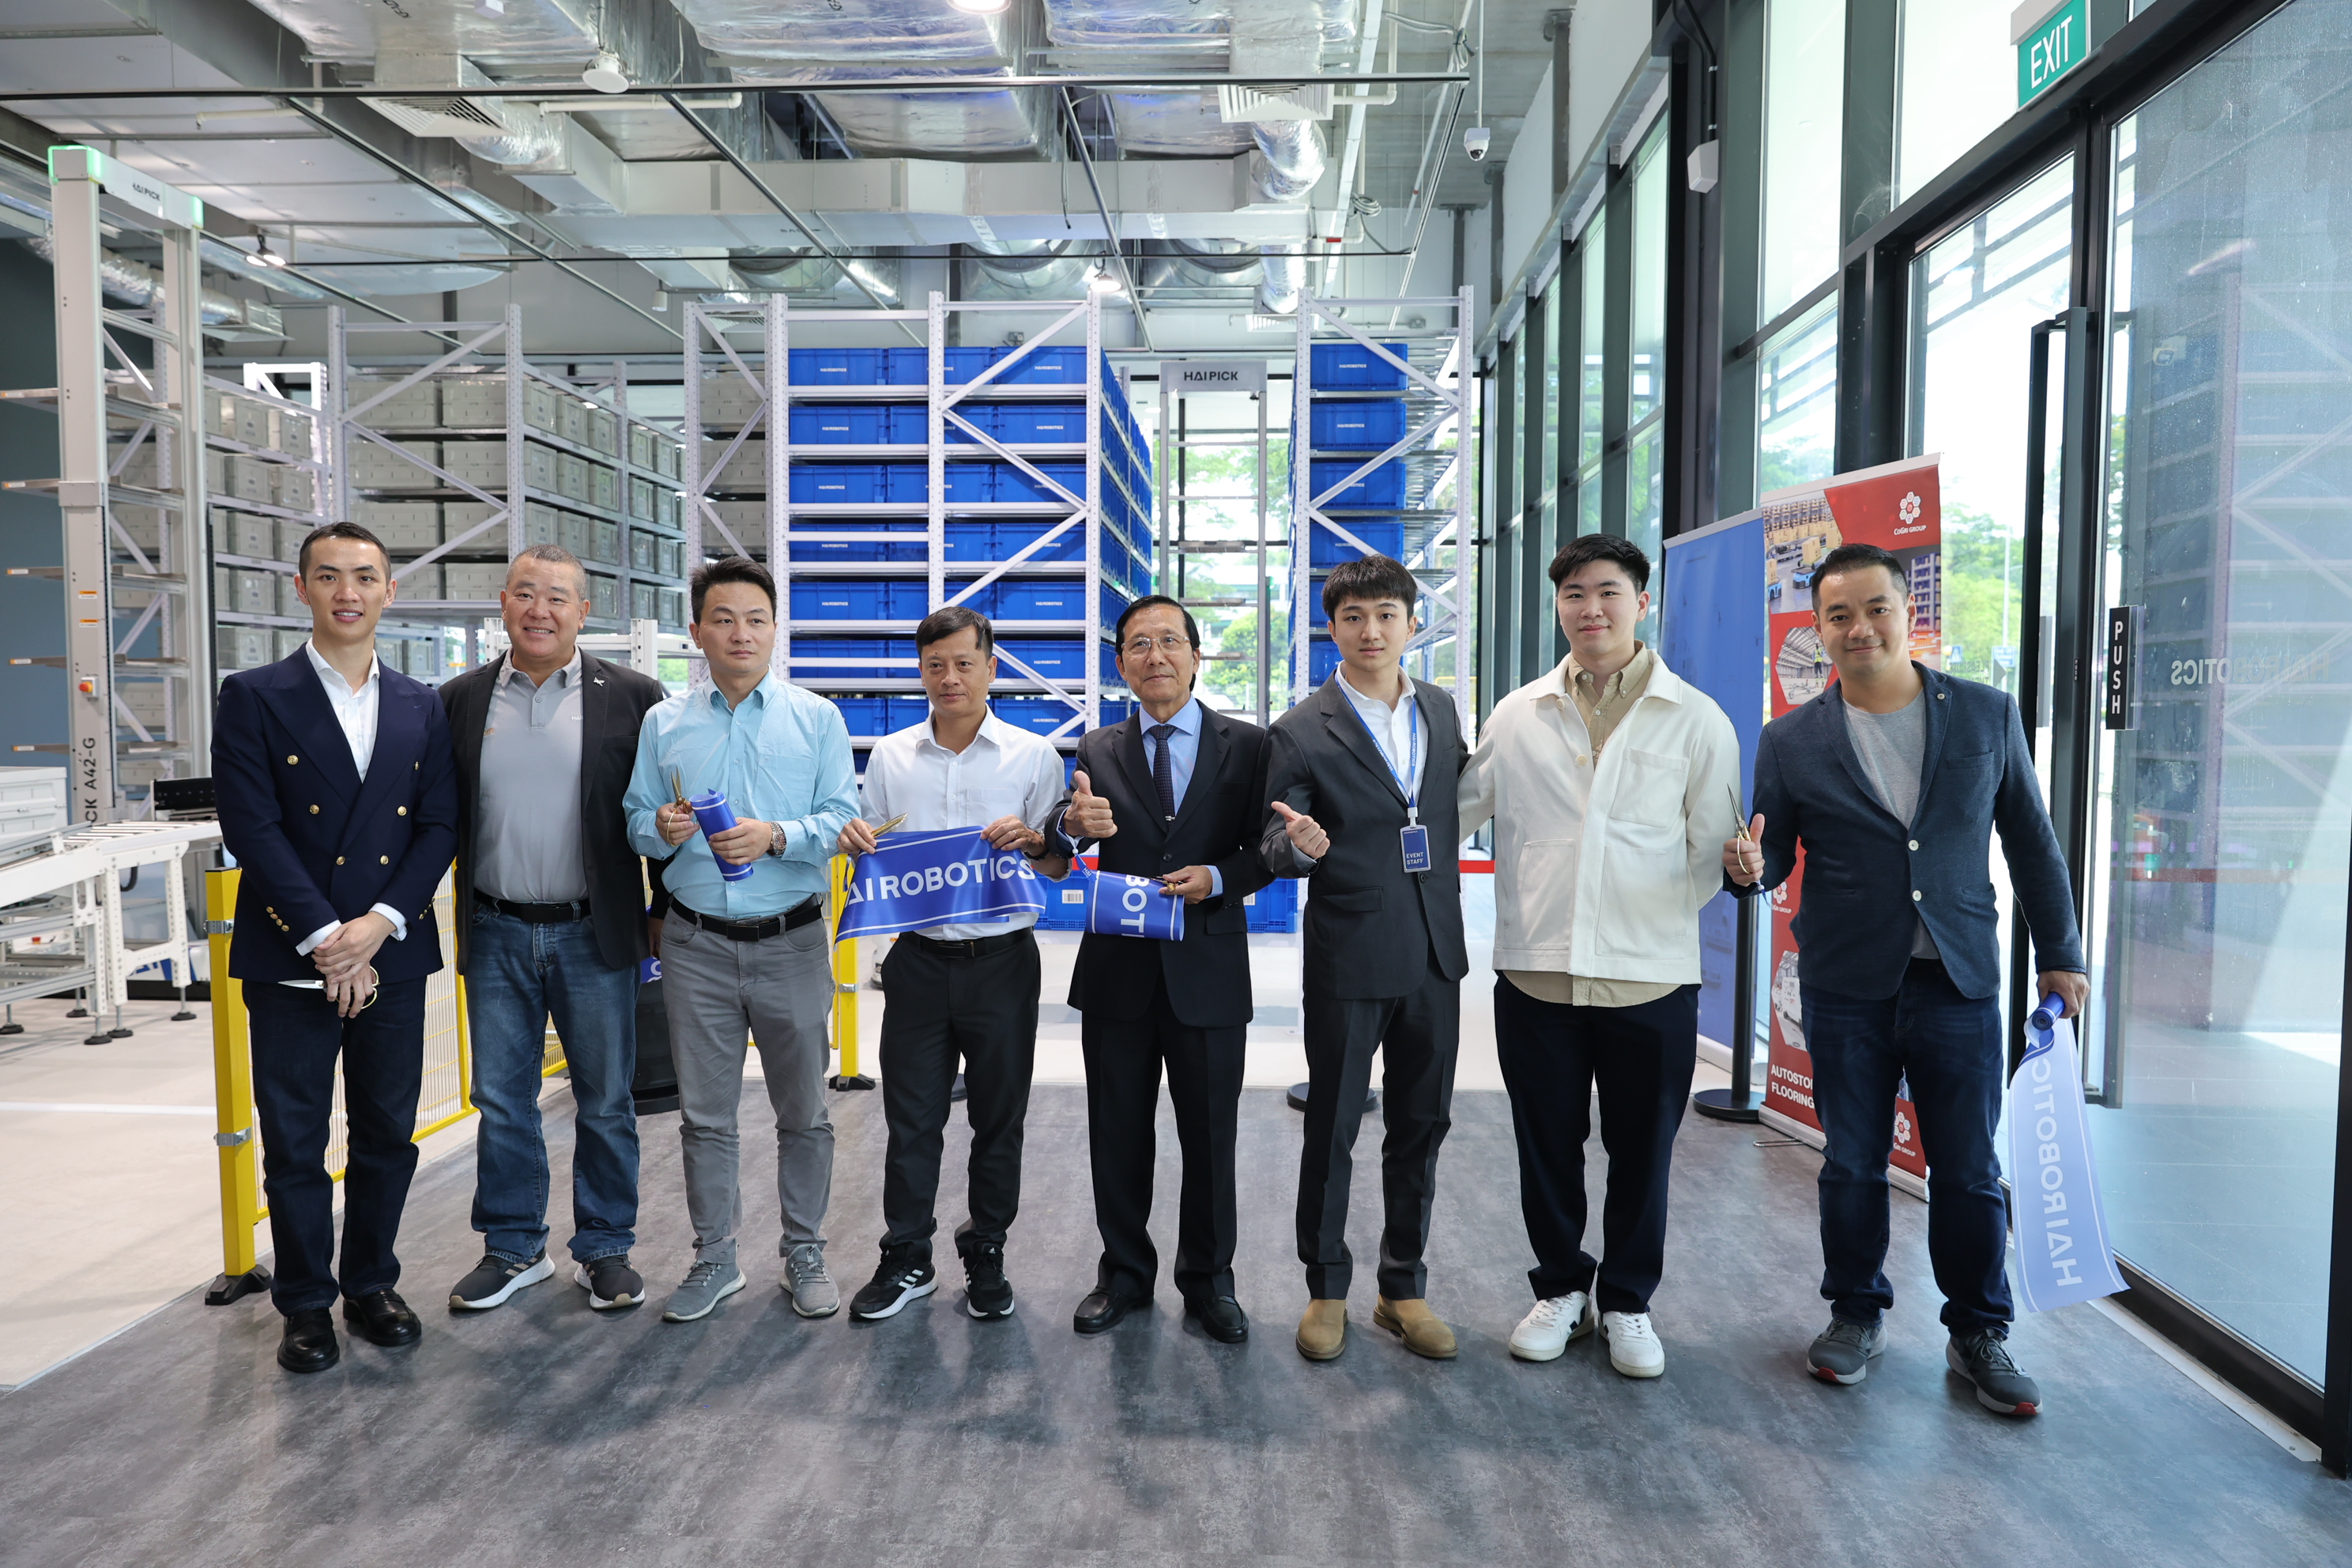 The important step in cooperation between Hai Robotics and ACETEC Technology